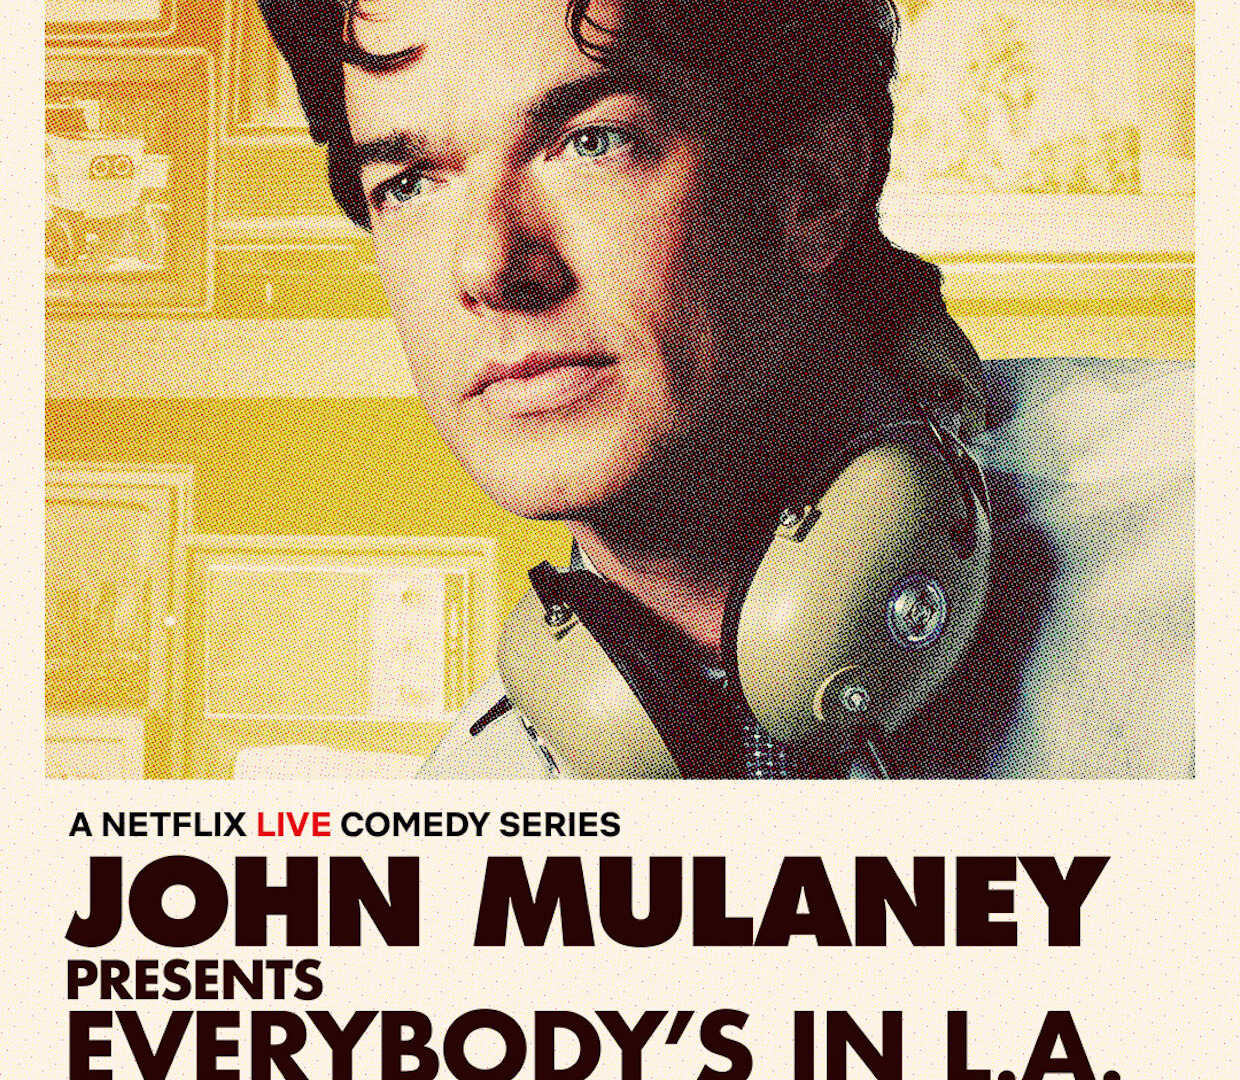 Show John Mulaney Presents: Everybody's in L.A.